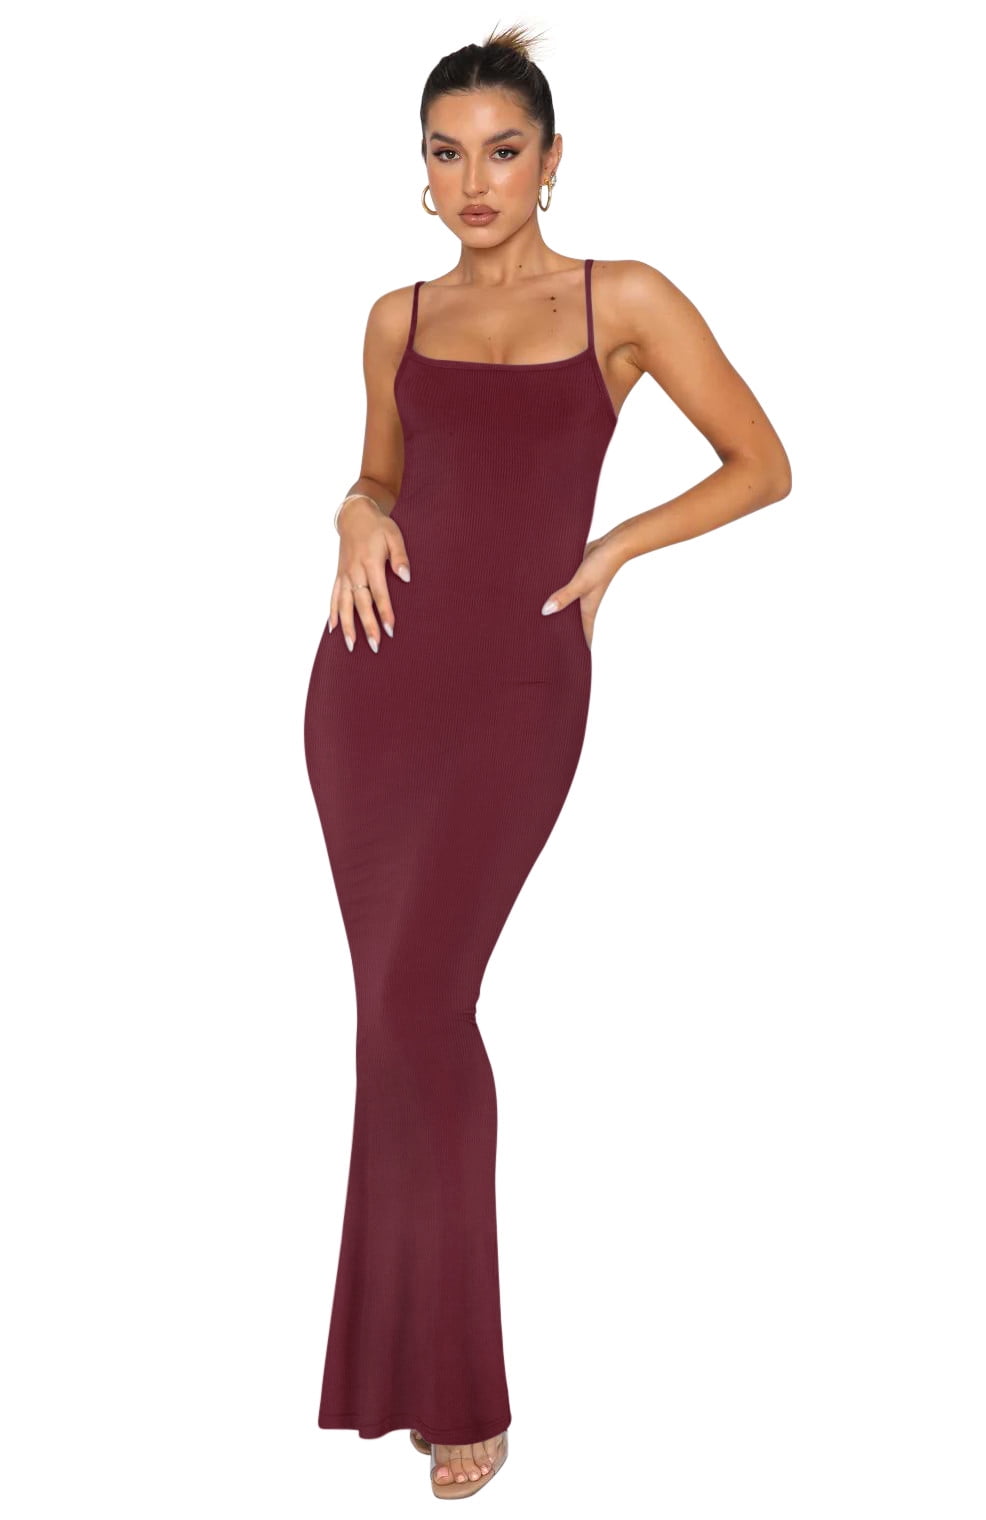 REORIA Women's Cami Dress Solid Basic Ribbed Wrap Long Dresses